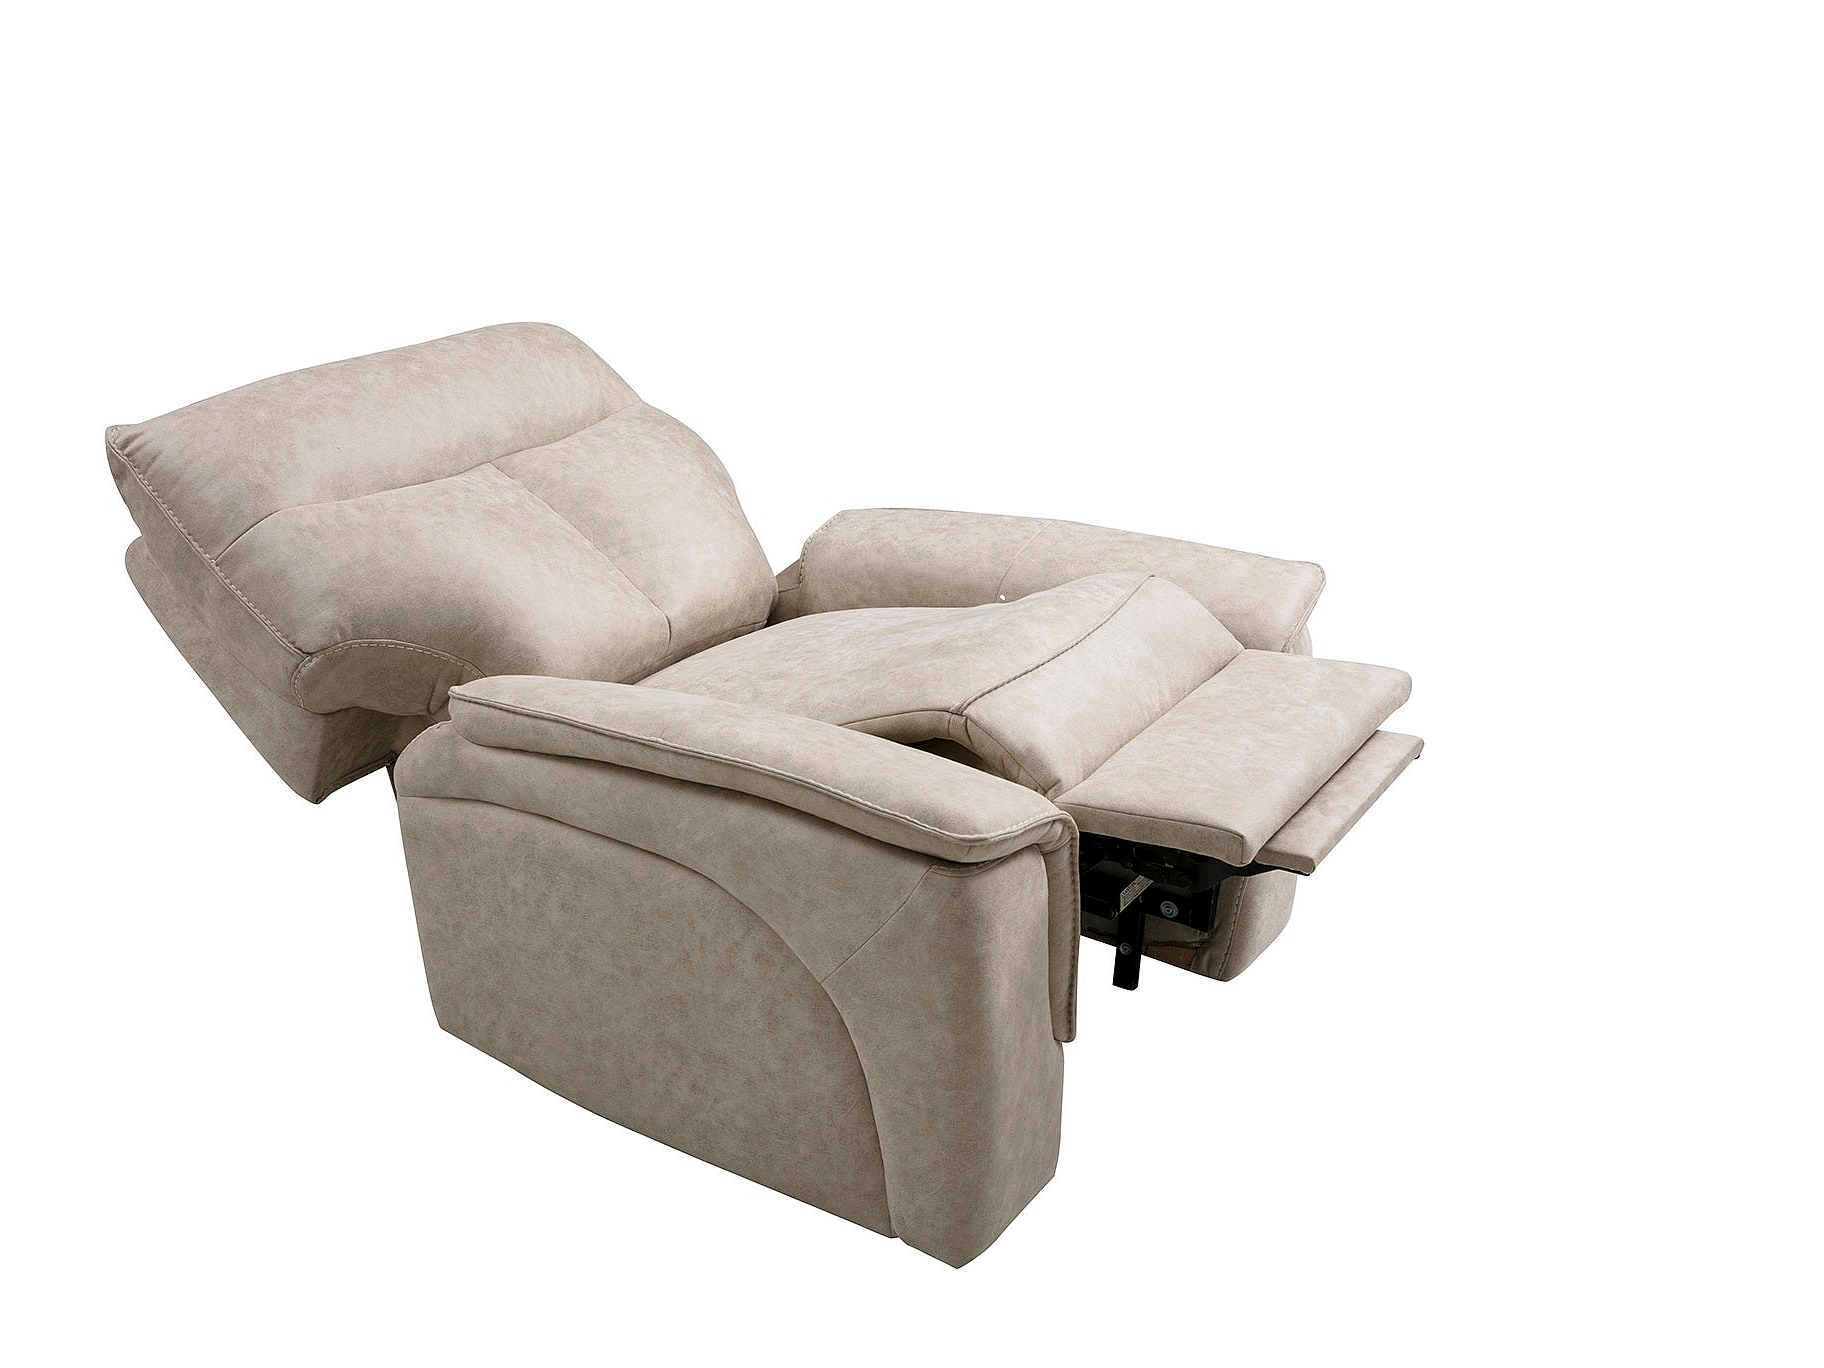 a reclining chair with a reclining chair underneath it